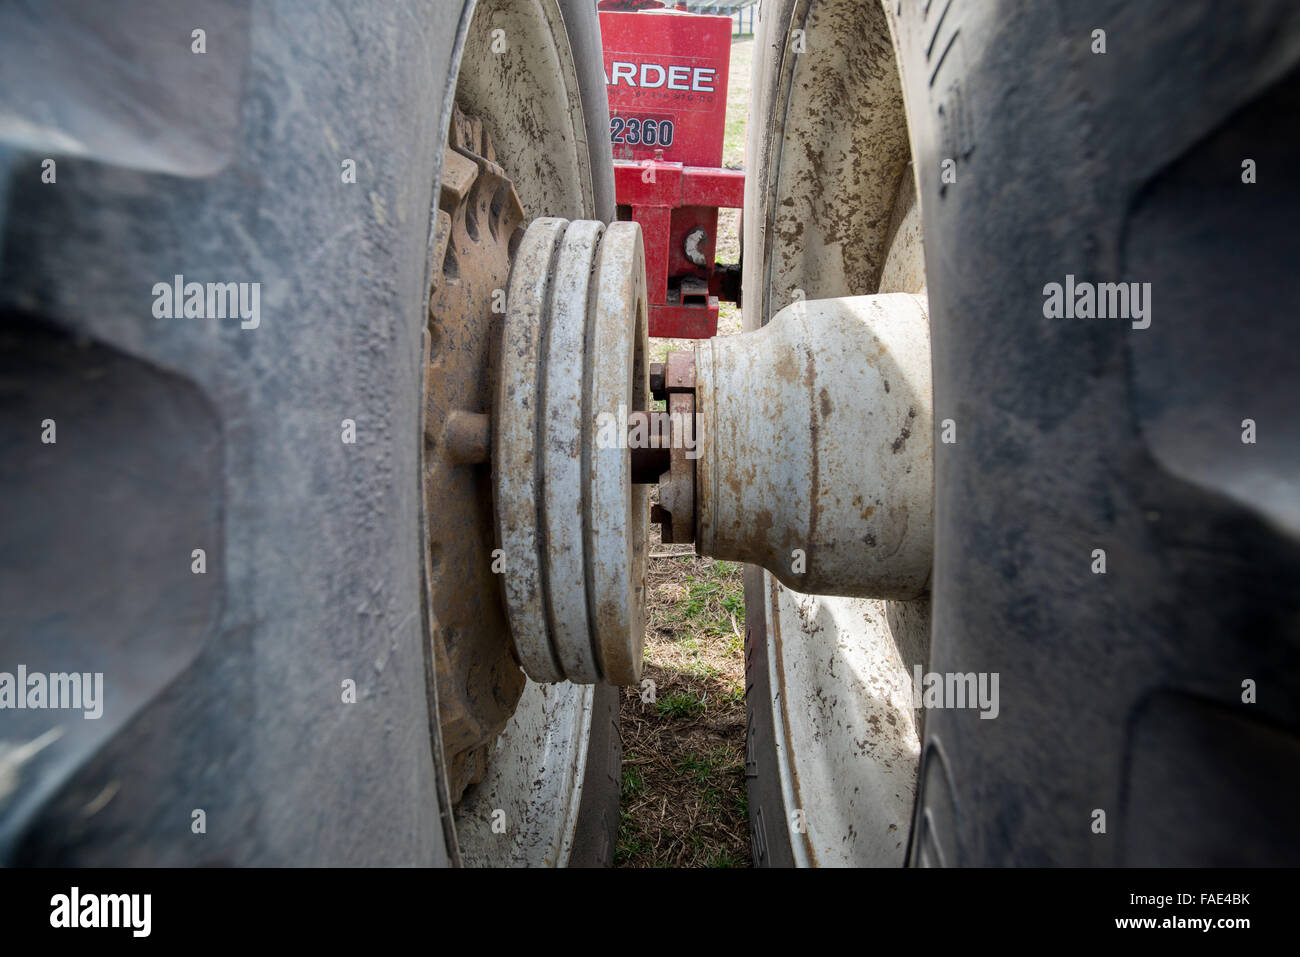 Close-up of wheels on a John Deere tractor Stock Photo